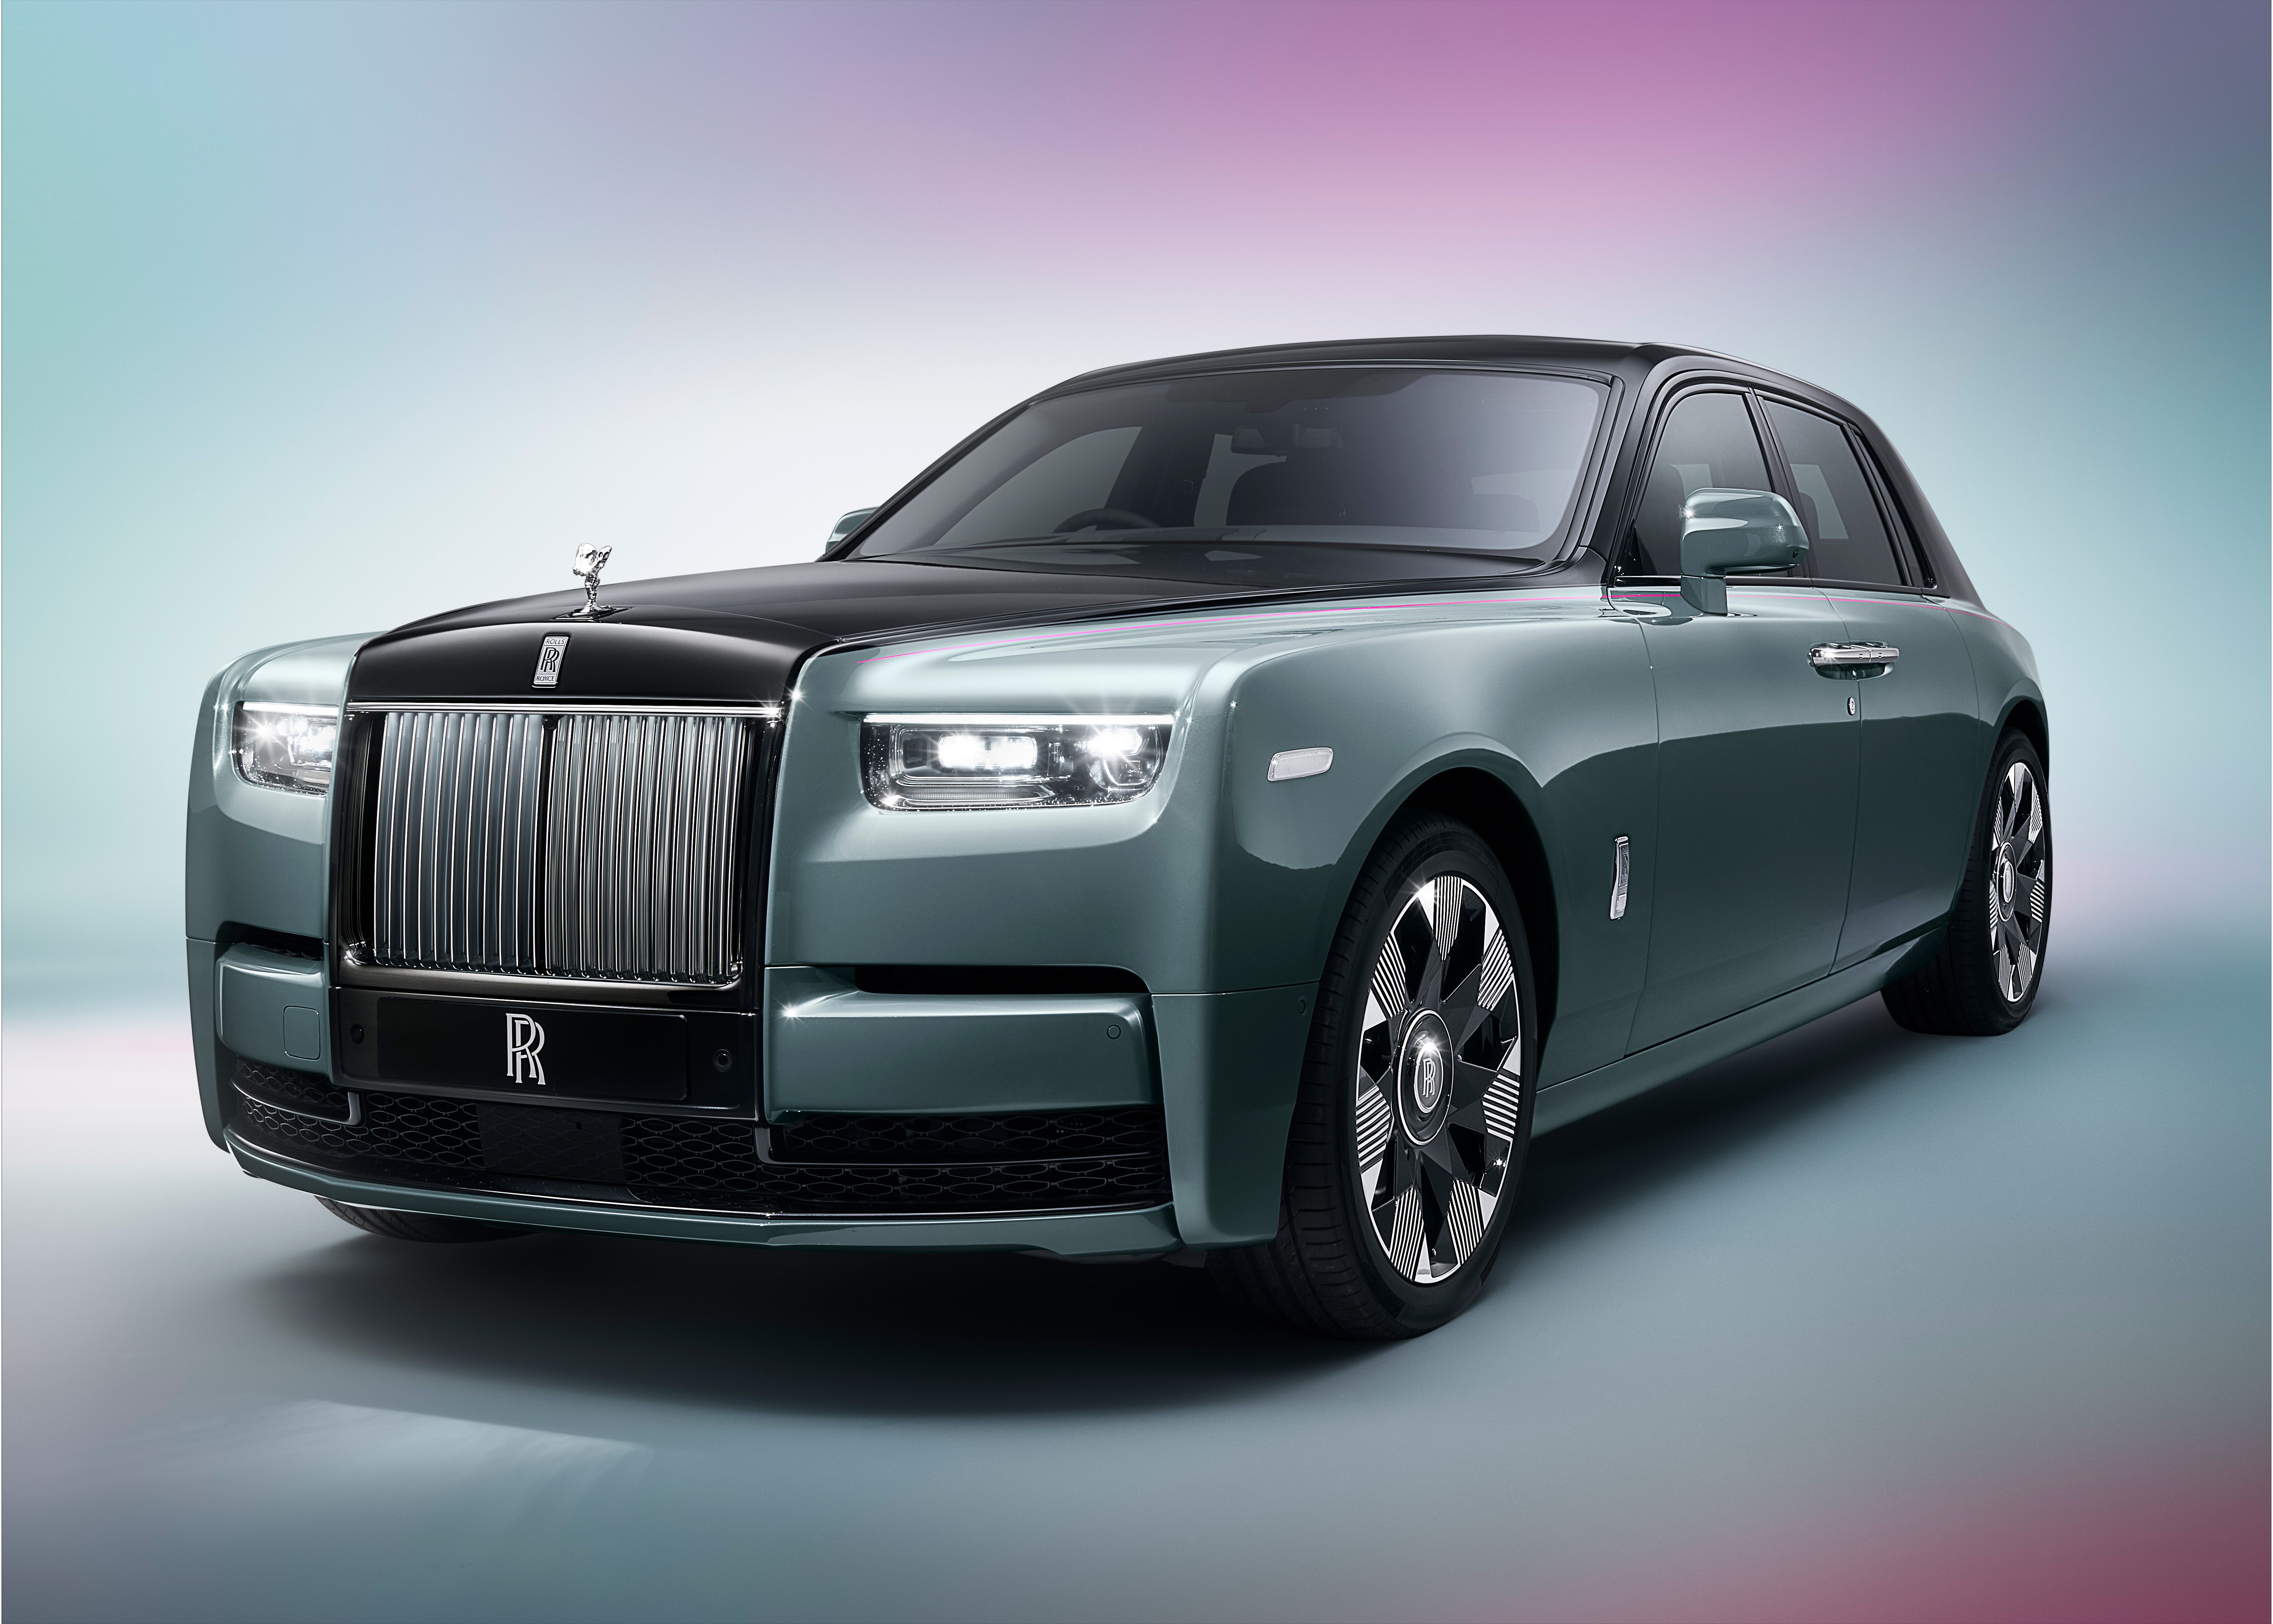 RollsRoyce Ghost Engine Reviews  Check 3 Latest Reviews  Ratings